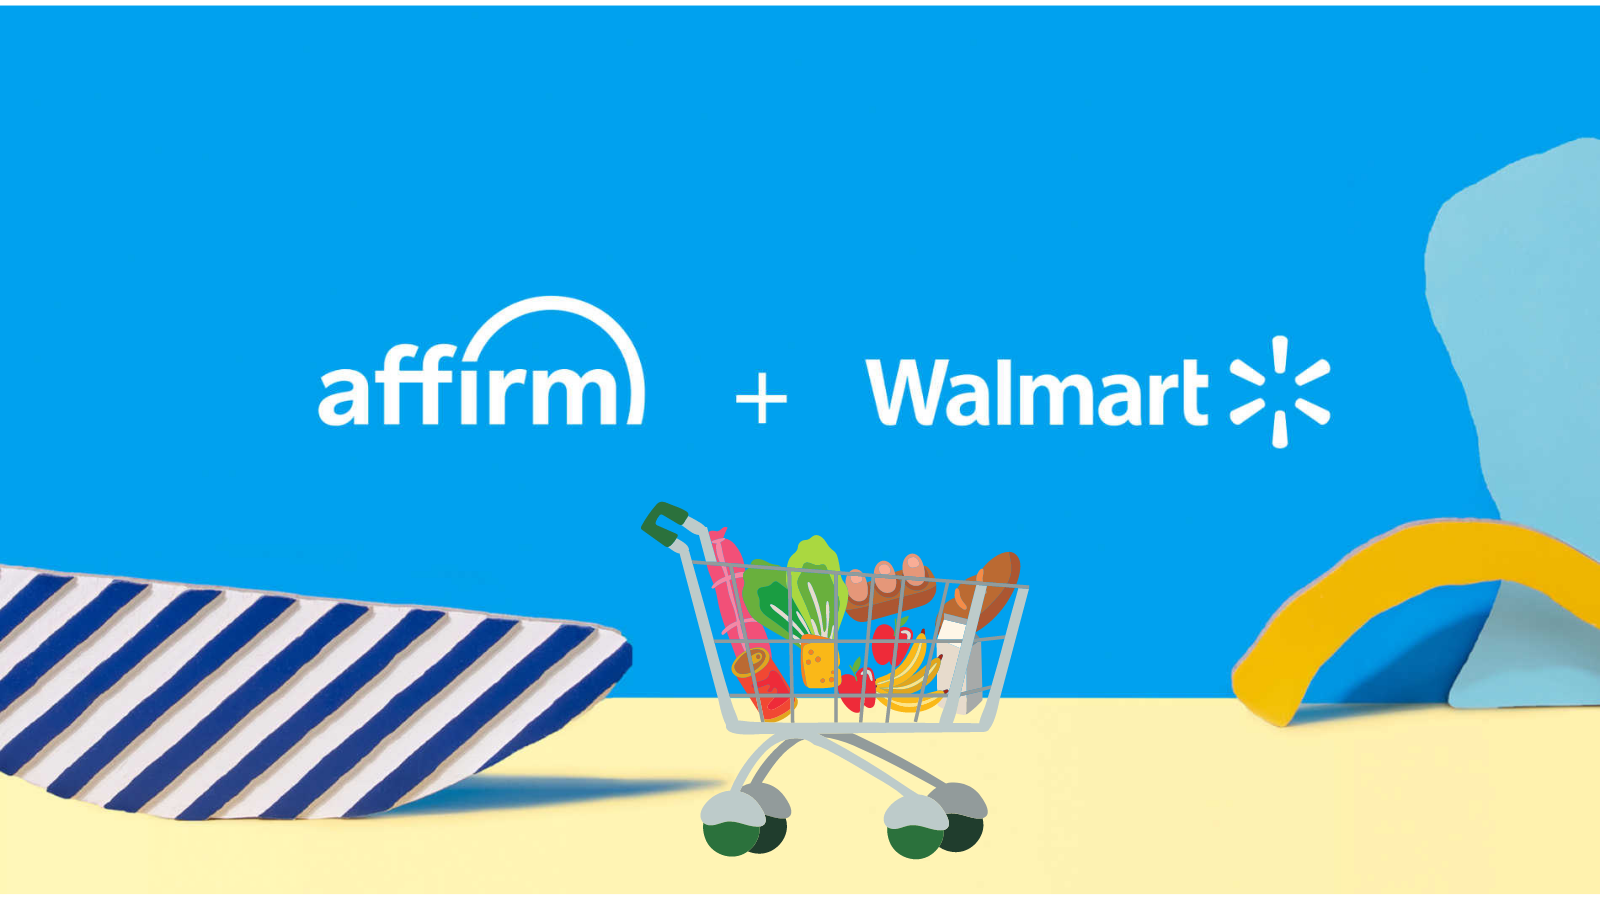 How to Use Affirm At Walmart? (Every Thing You Need to Know)